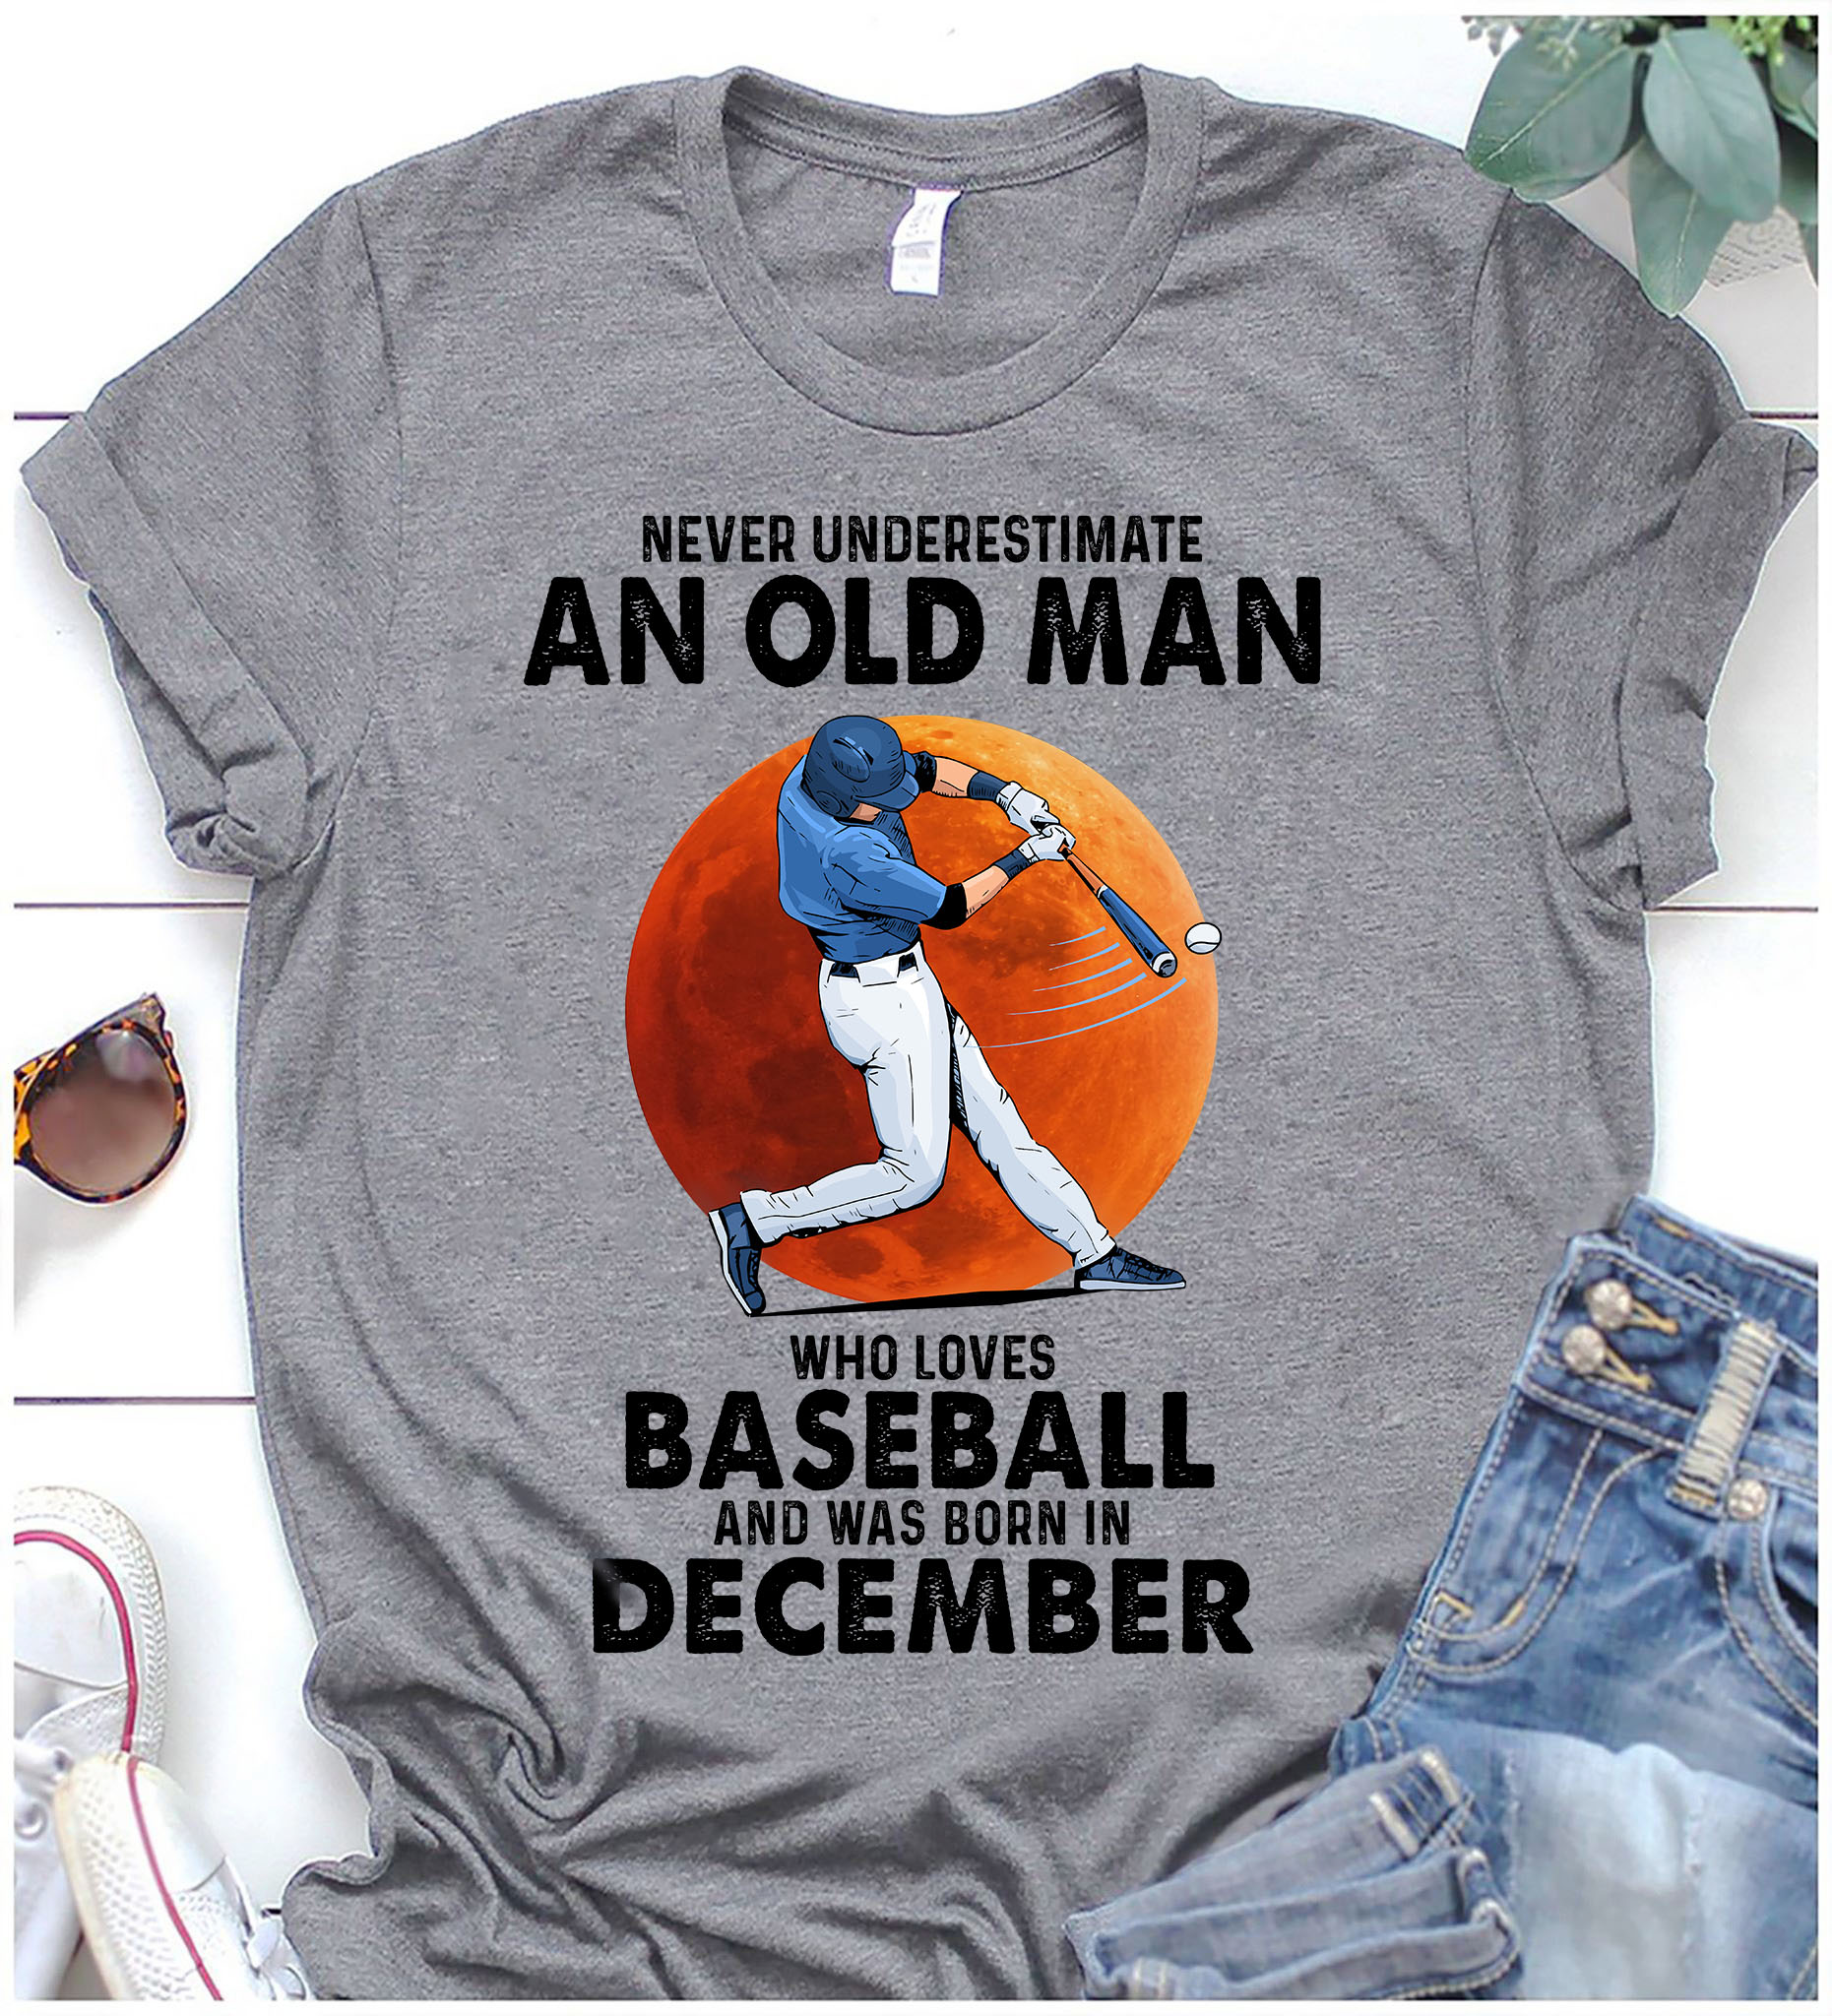 Never underestimate an old man who loves baseball and was born in December